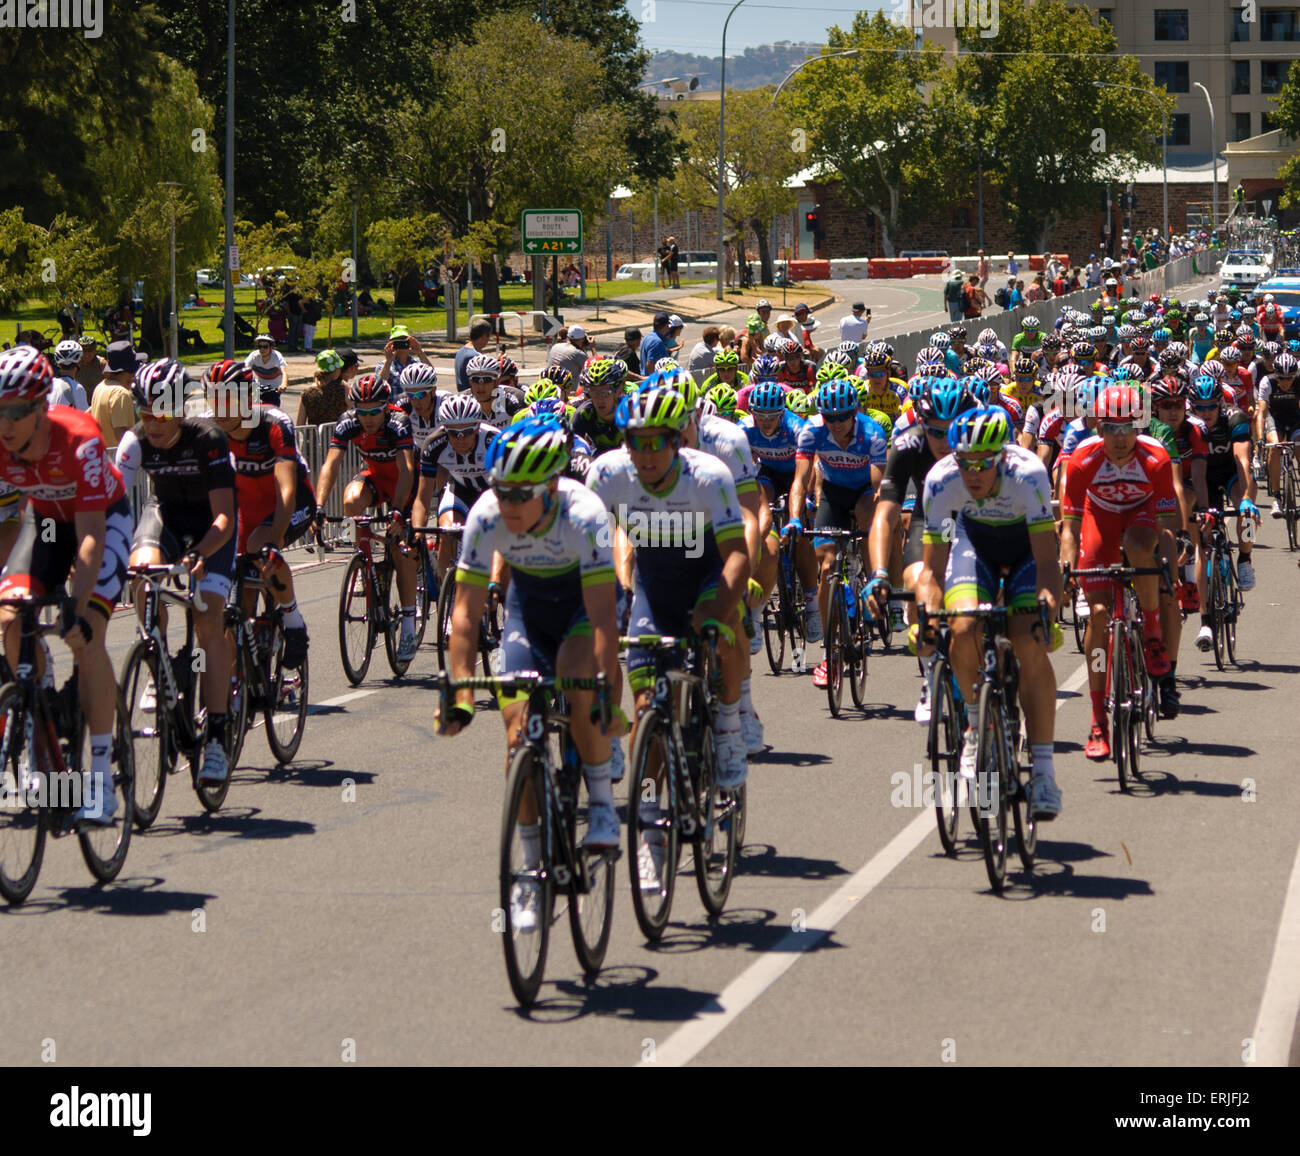 A bicycle race in Adelaide, SA, Australia Stock Photo